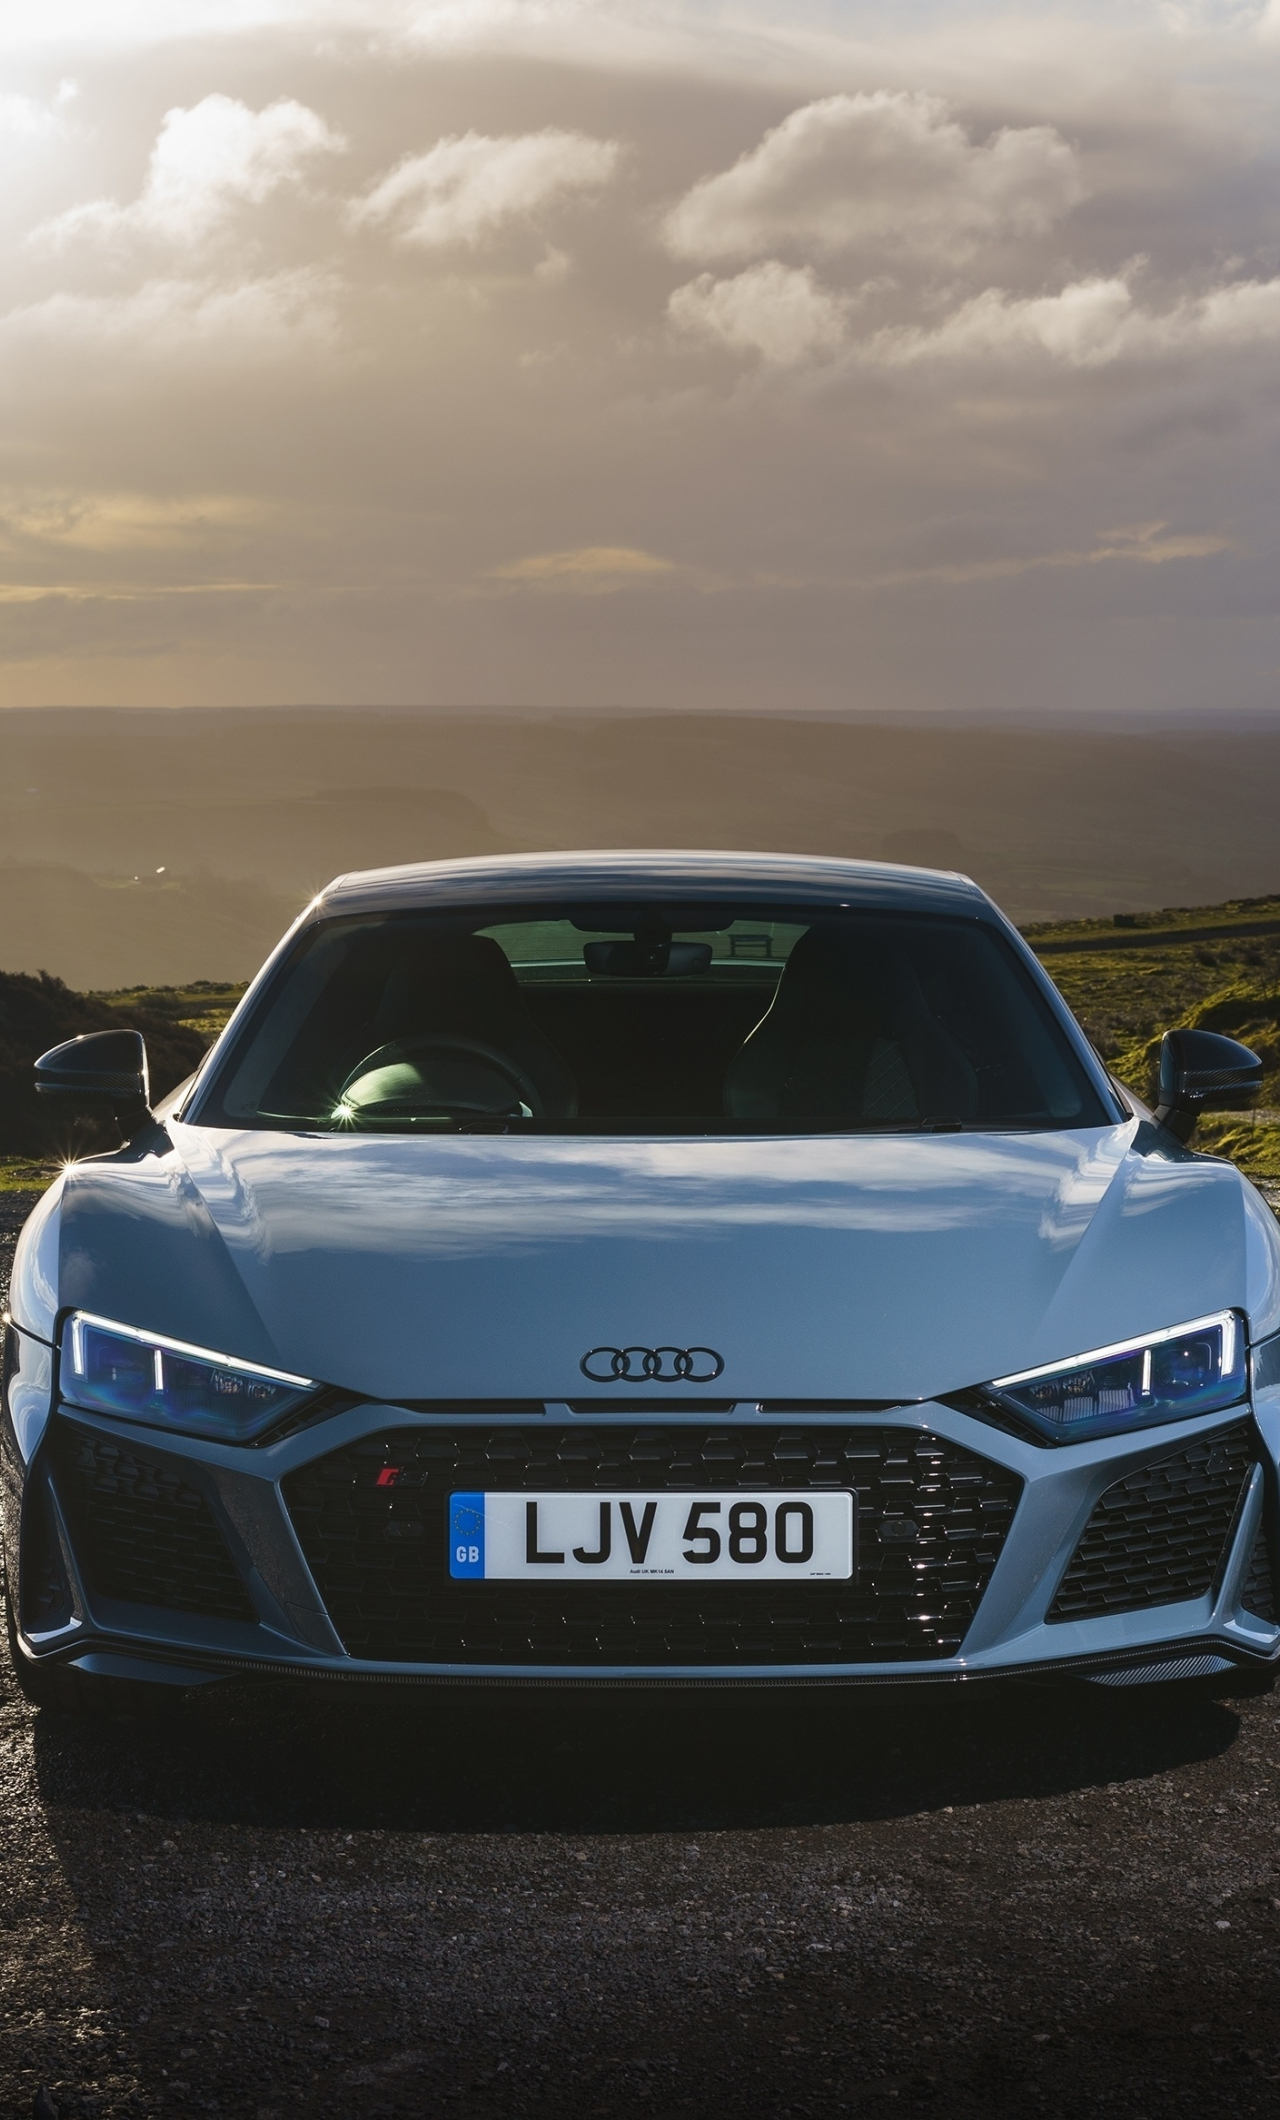 Download wallpaper 1280x2120 off-road, audi r8 v10, luxury car, iphone 6  plus, 1280x2120 hd background, 20627